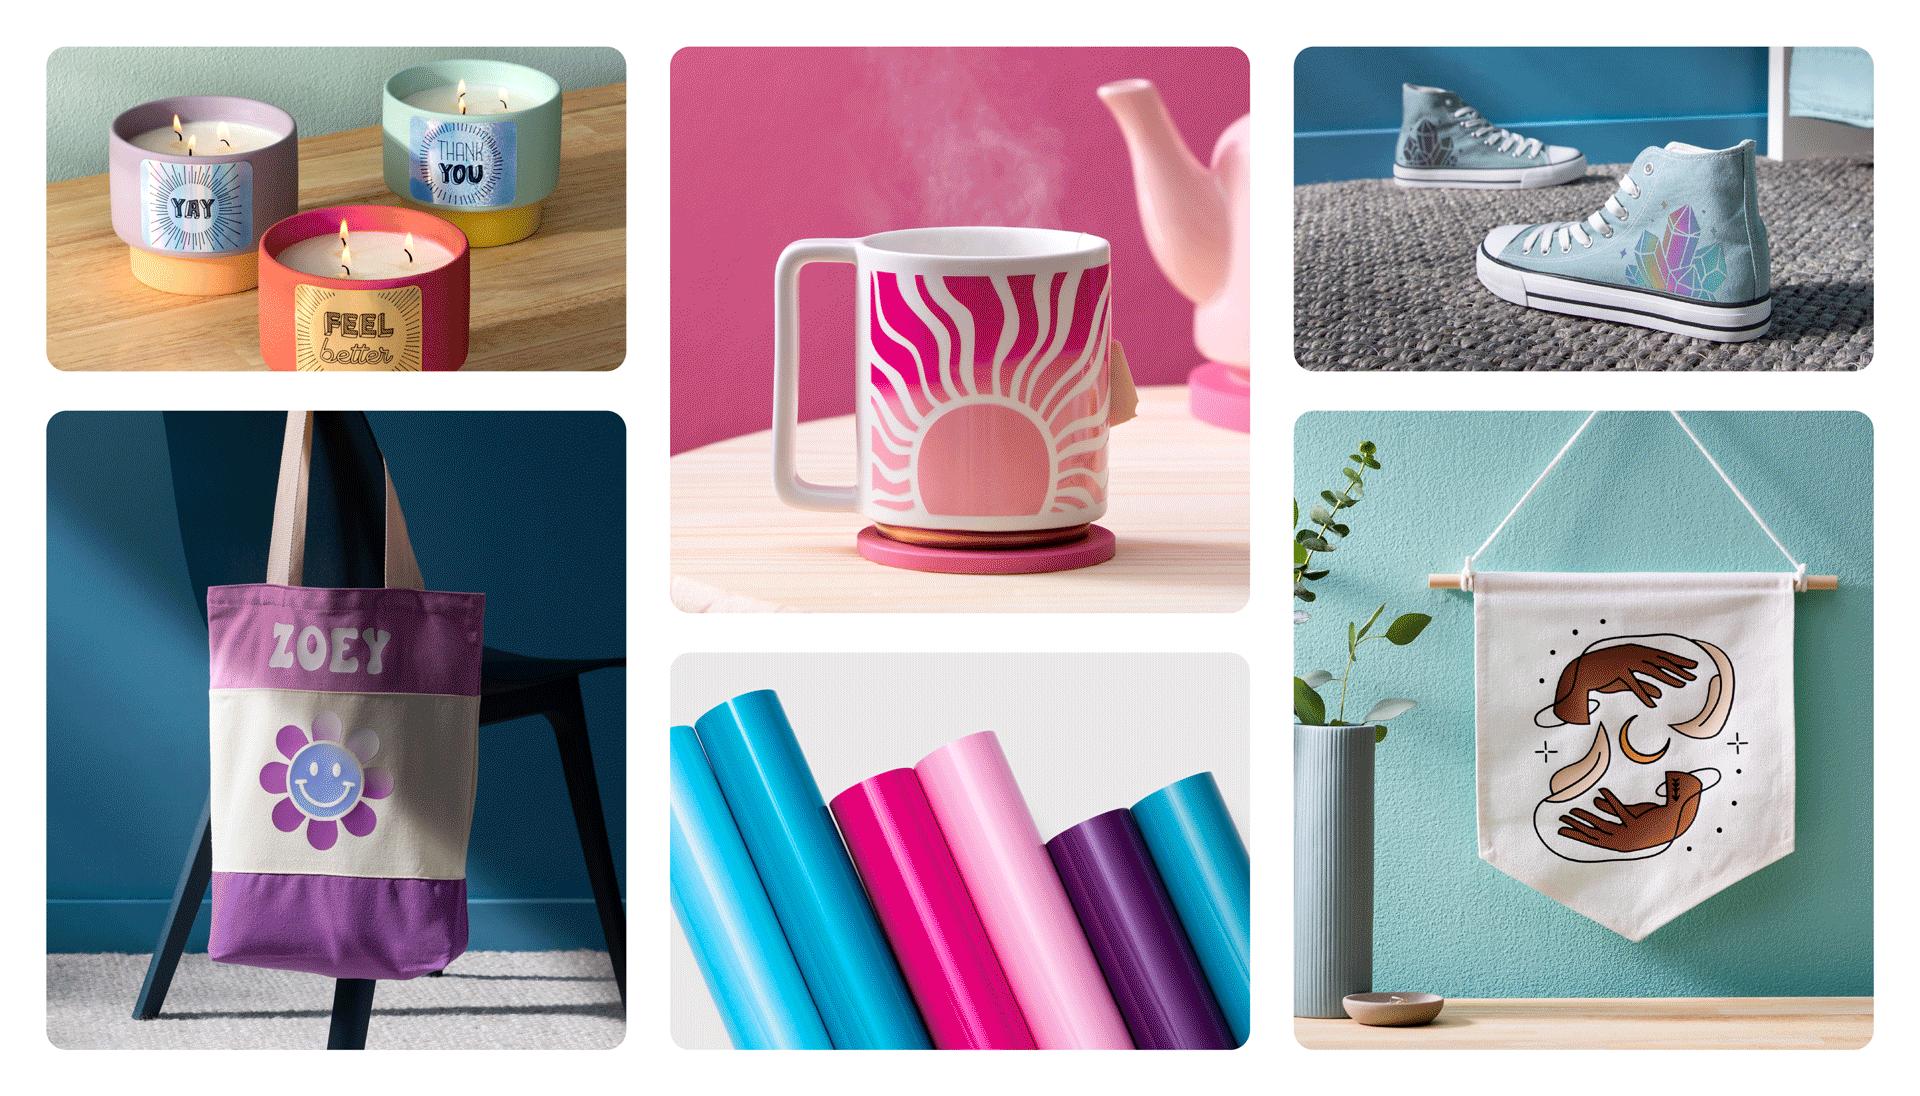 Make magic with our new materials